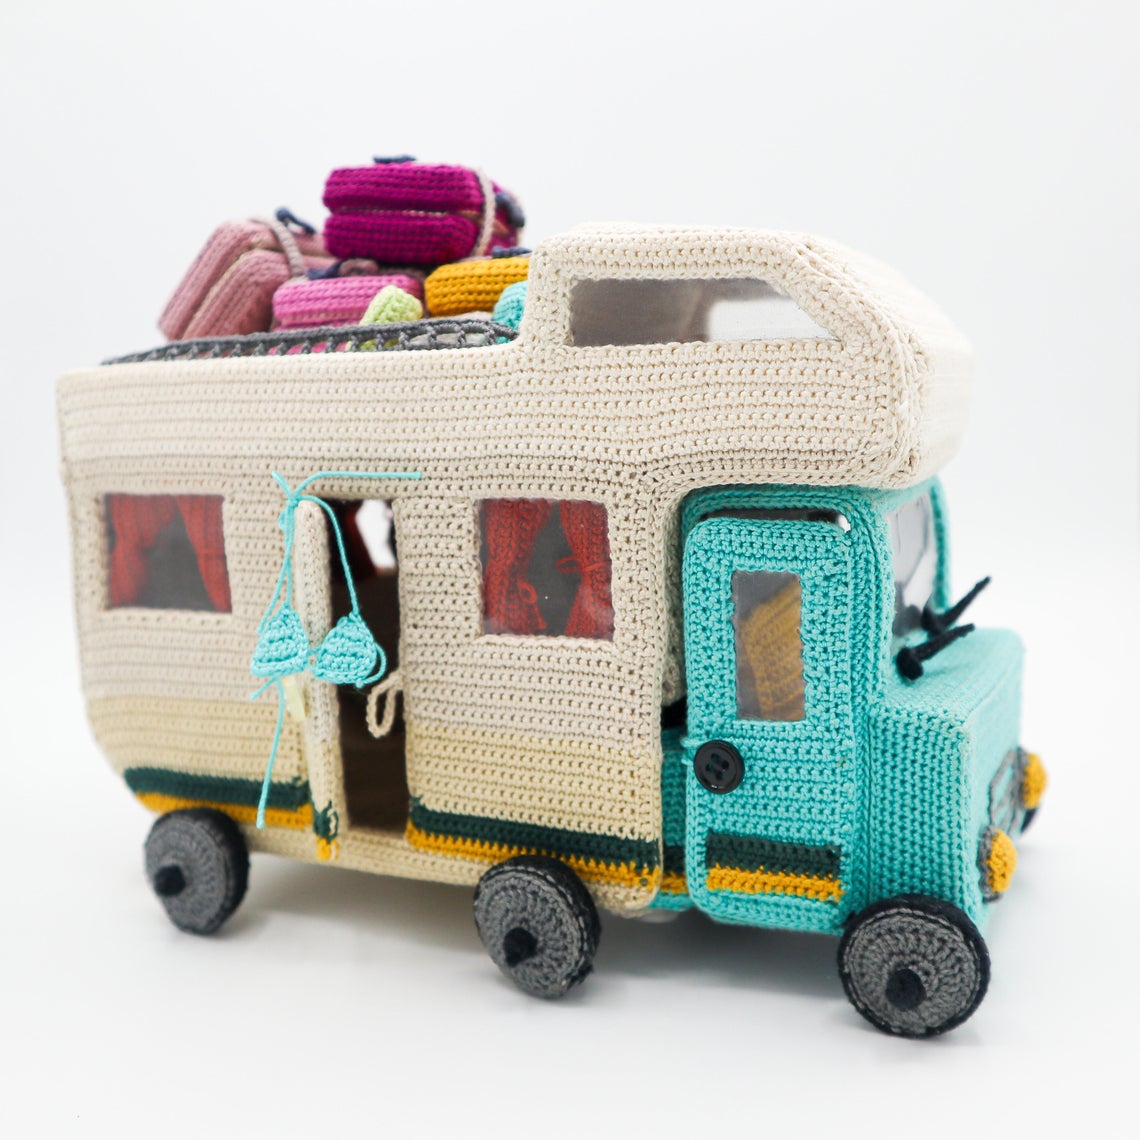 Incredible Crochet Caravan Pattern With a Ton Of Accessories To Boot ... Maximum Points For Giftability!